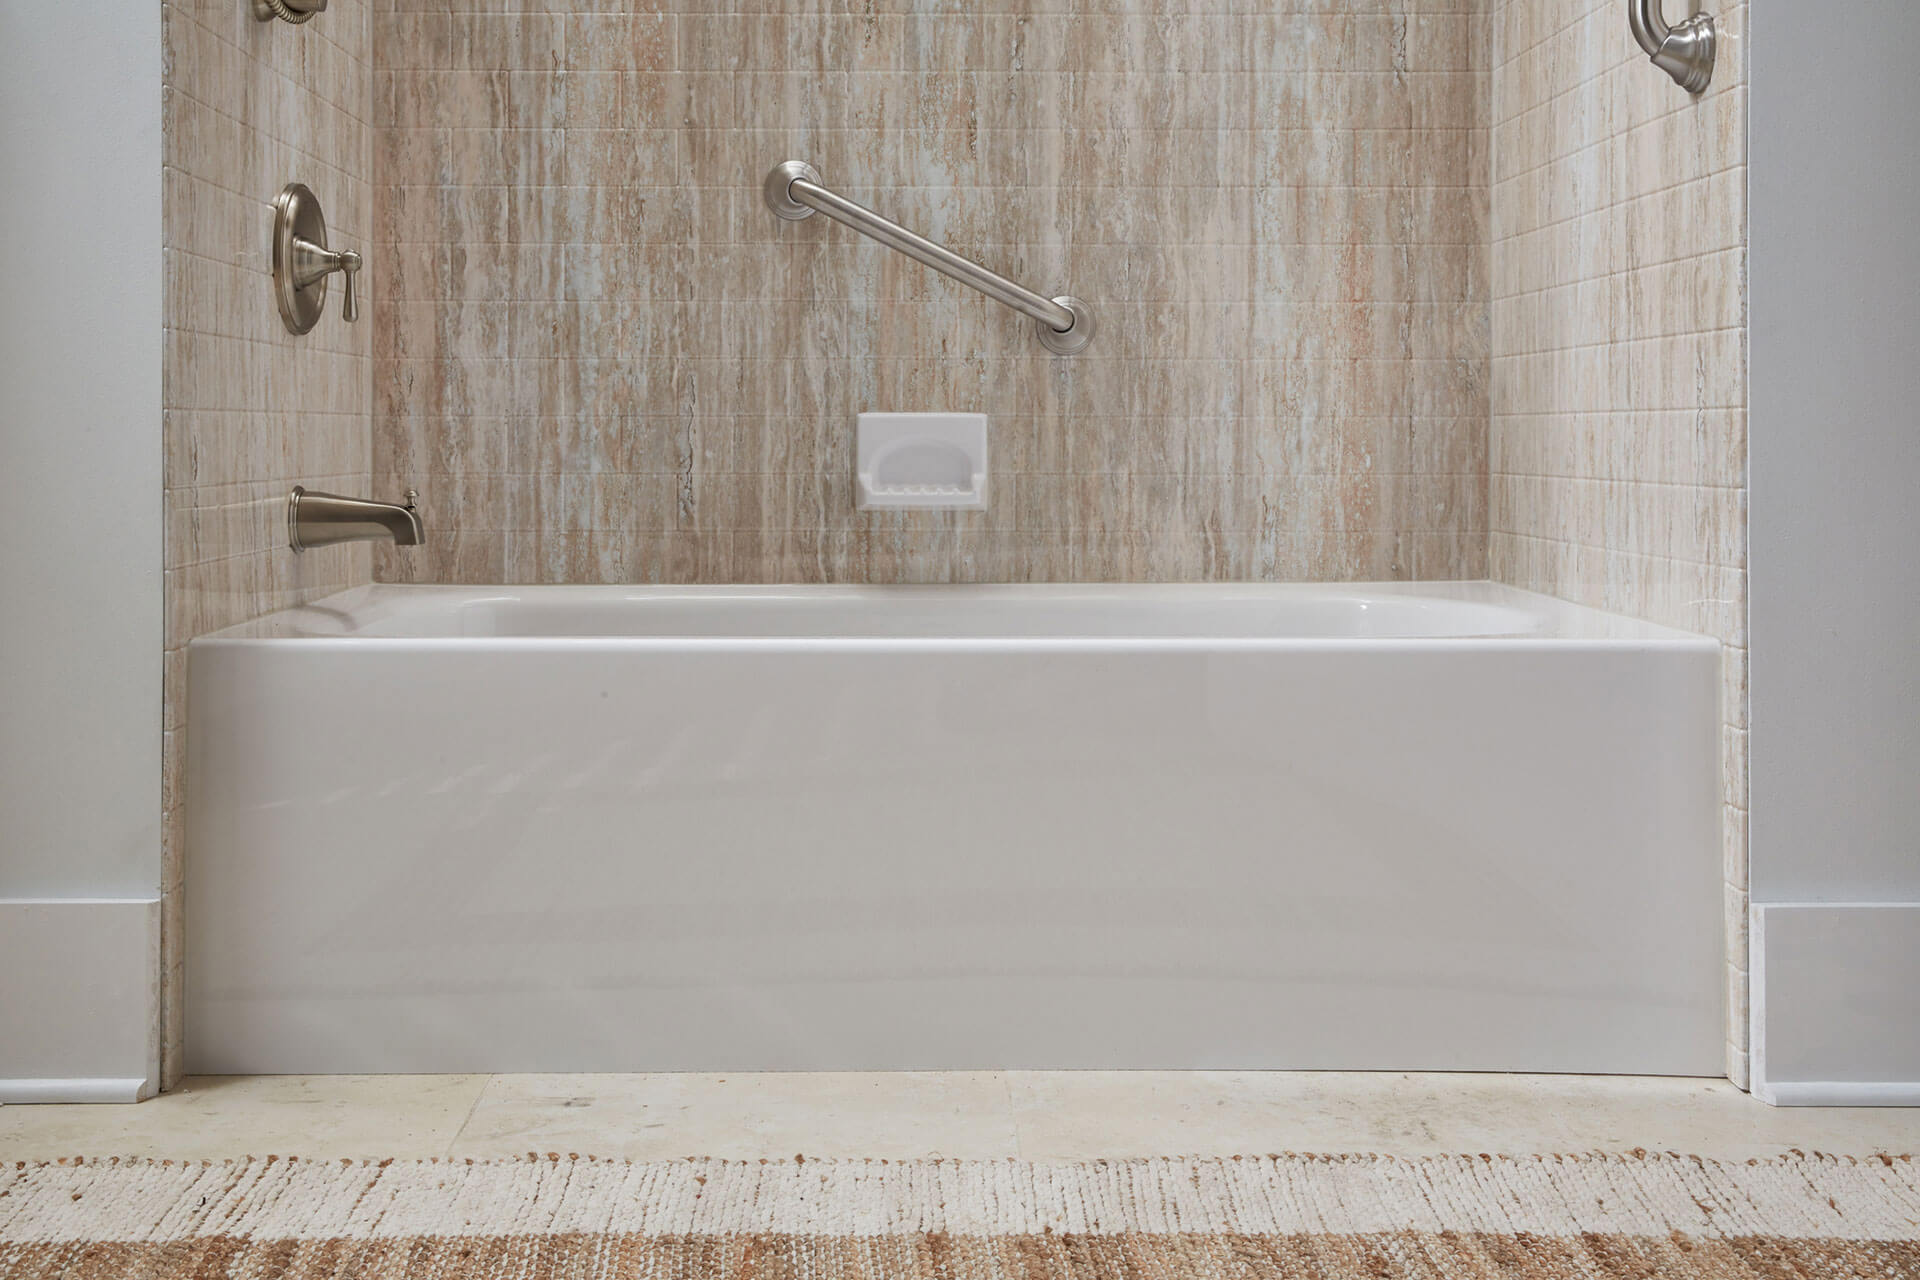 A soaker tub with a tile wall and a grab bar on the wall.